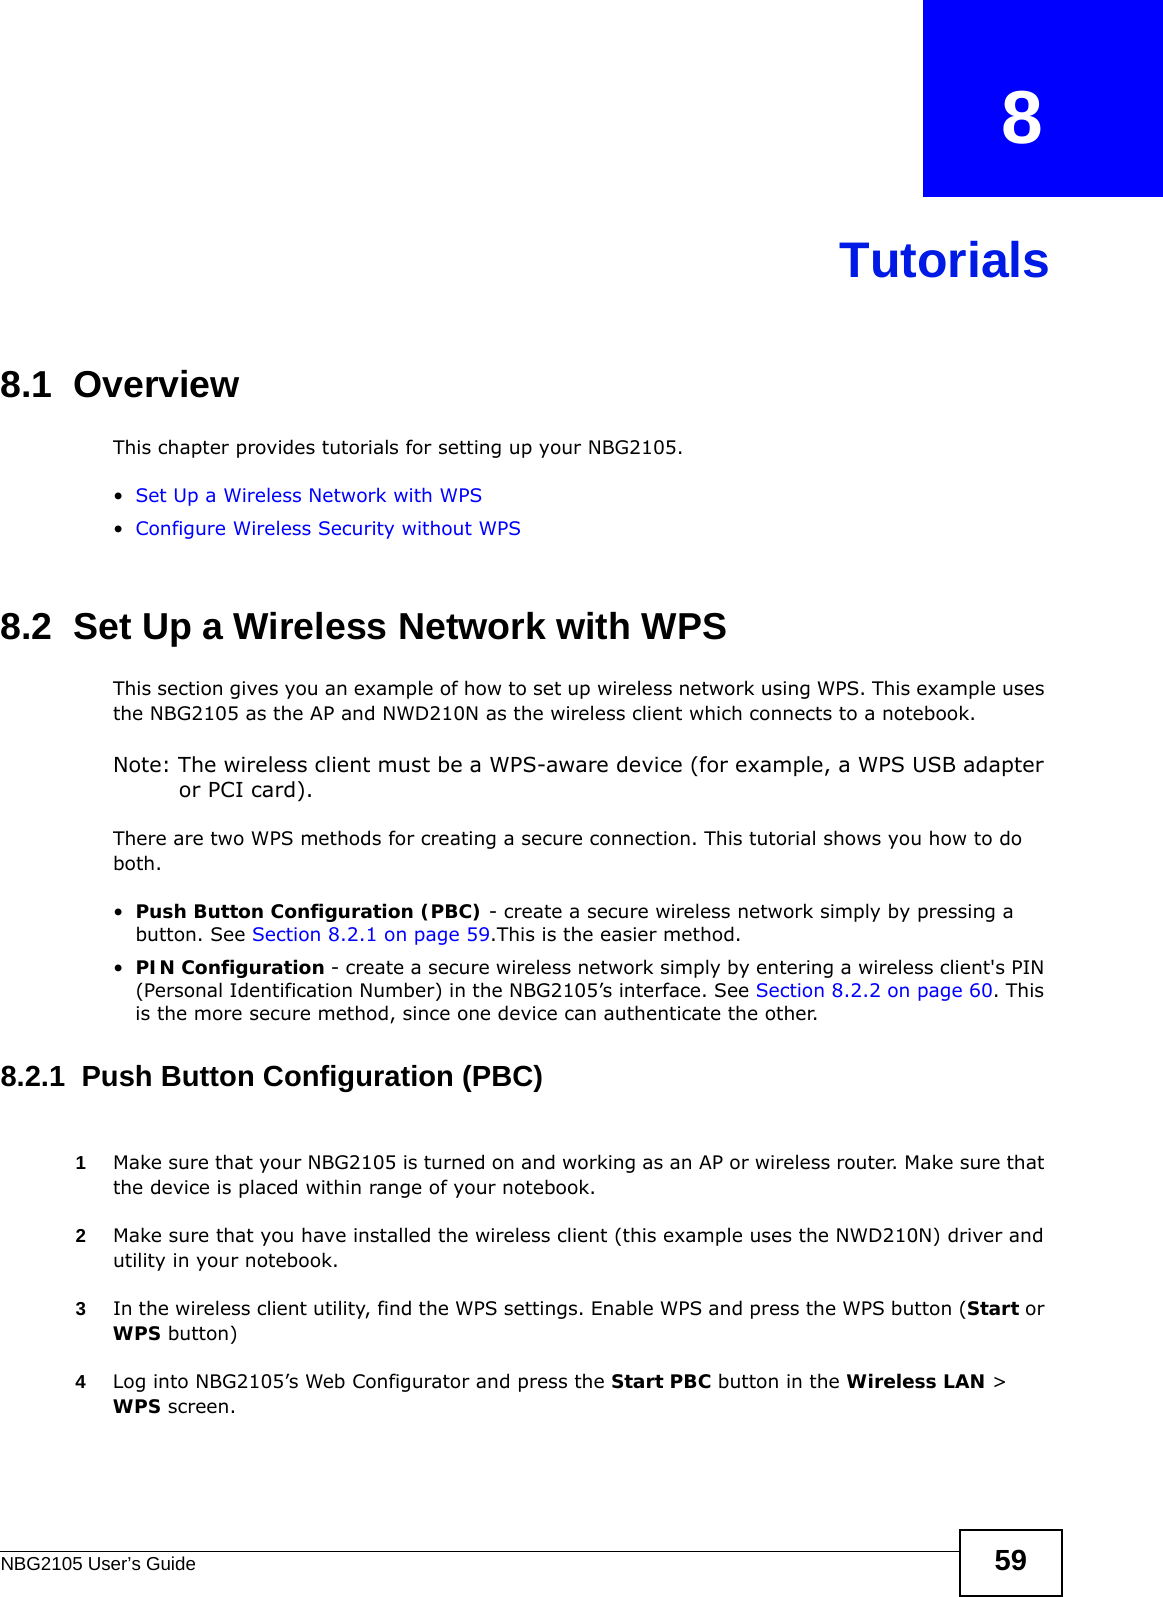 NBG2105 User’s Guide 59CHAPTER   8Tutorials8.1  OverviewThis chapter provides tutorials for setting up your NBG2105.•Set Up a Wireless Network with WPS•Configure Wireless Security without WPS8.2  Set Up a Wireless Network with WPSThis section gives you an example of how to set up wireless network using WPS. This example uses the NBG2105 as the AP and NWD210N as the wireless client which connects to a notebook. Note: The wireless client must be a WPS-aware device (for example, a WPS USB adapter or PCI card).There are two WPS methods for creating a secure connection. This tutorial shows you how to do both.•Push Button Configuration (PBC) - create a secure wireless network simply by pressing a button. See Section 8.2.1 on page 59.This is the easier method.•PIN Configuration - create a secure wireless network simply by entering a wireless client&apos;s PIN (Personal Identification Number) in the NBG2105’s interface. See Section 8.2.2 on page 60. This is the more secure method, since one device can authenticate the other.8.2.1  Push Button Configuration (PBC)1Make sure that your NBG2105 is turned on and working as an AP or wireless router. Make sure that the device is placed within range of your notebook. 2Make sure that you have installed the wireless client (this example uses the NWD210N) driver and utility in your notebook.3In the wireless client utility, find the WPS settings. Enable WPS and press the WPS button (Start or WPS button)4Log into NBG2105’s Web Configurator and press the Start PBC button in the Wireless LAN &gt; WPS screen. 